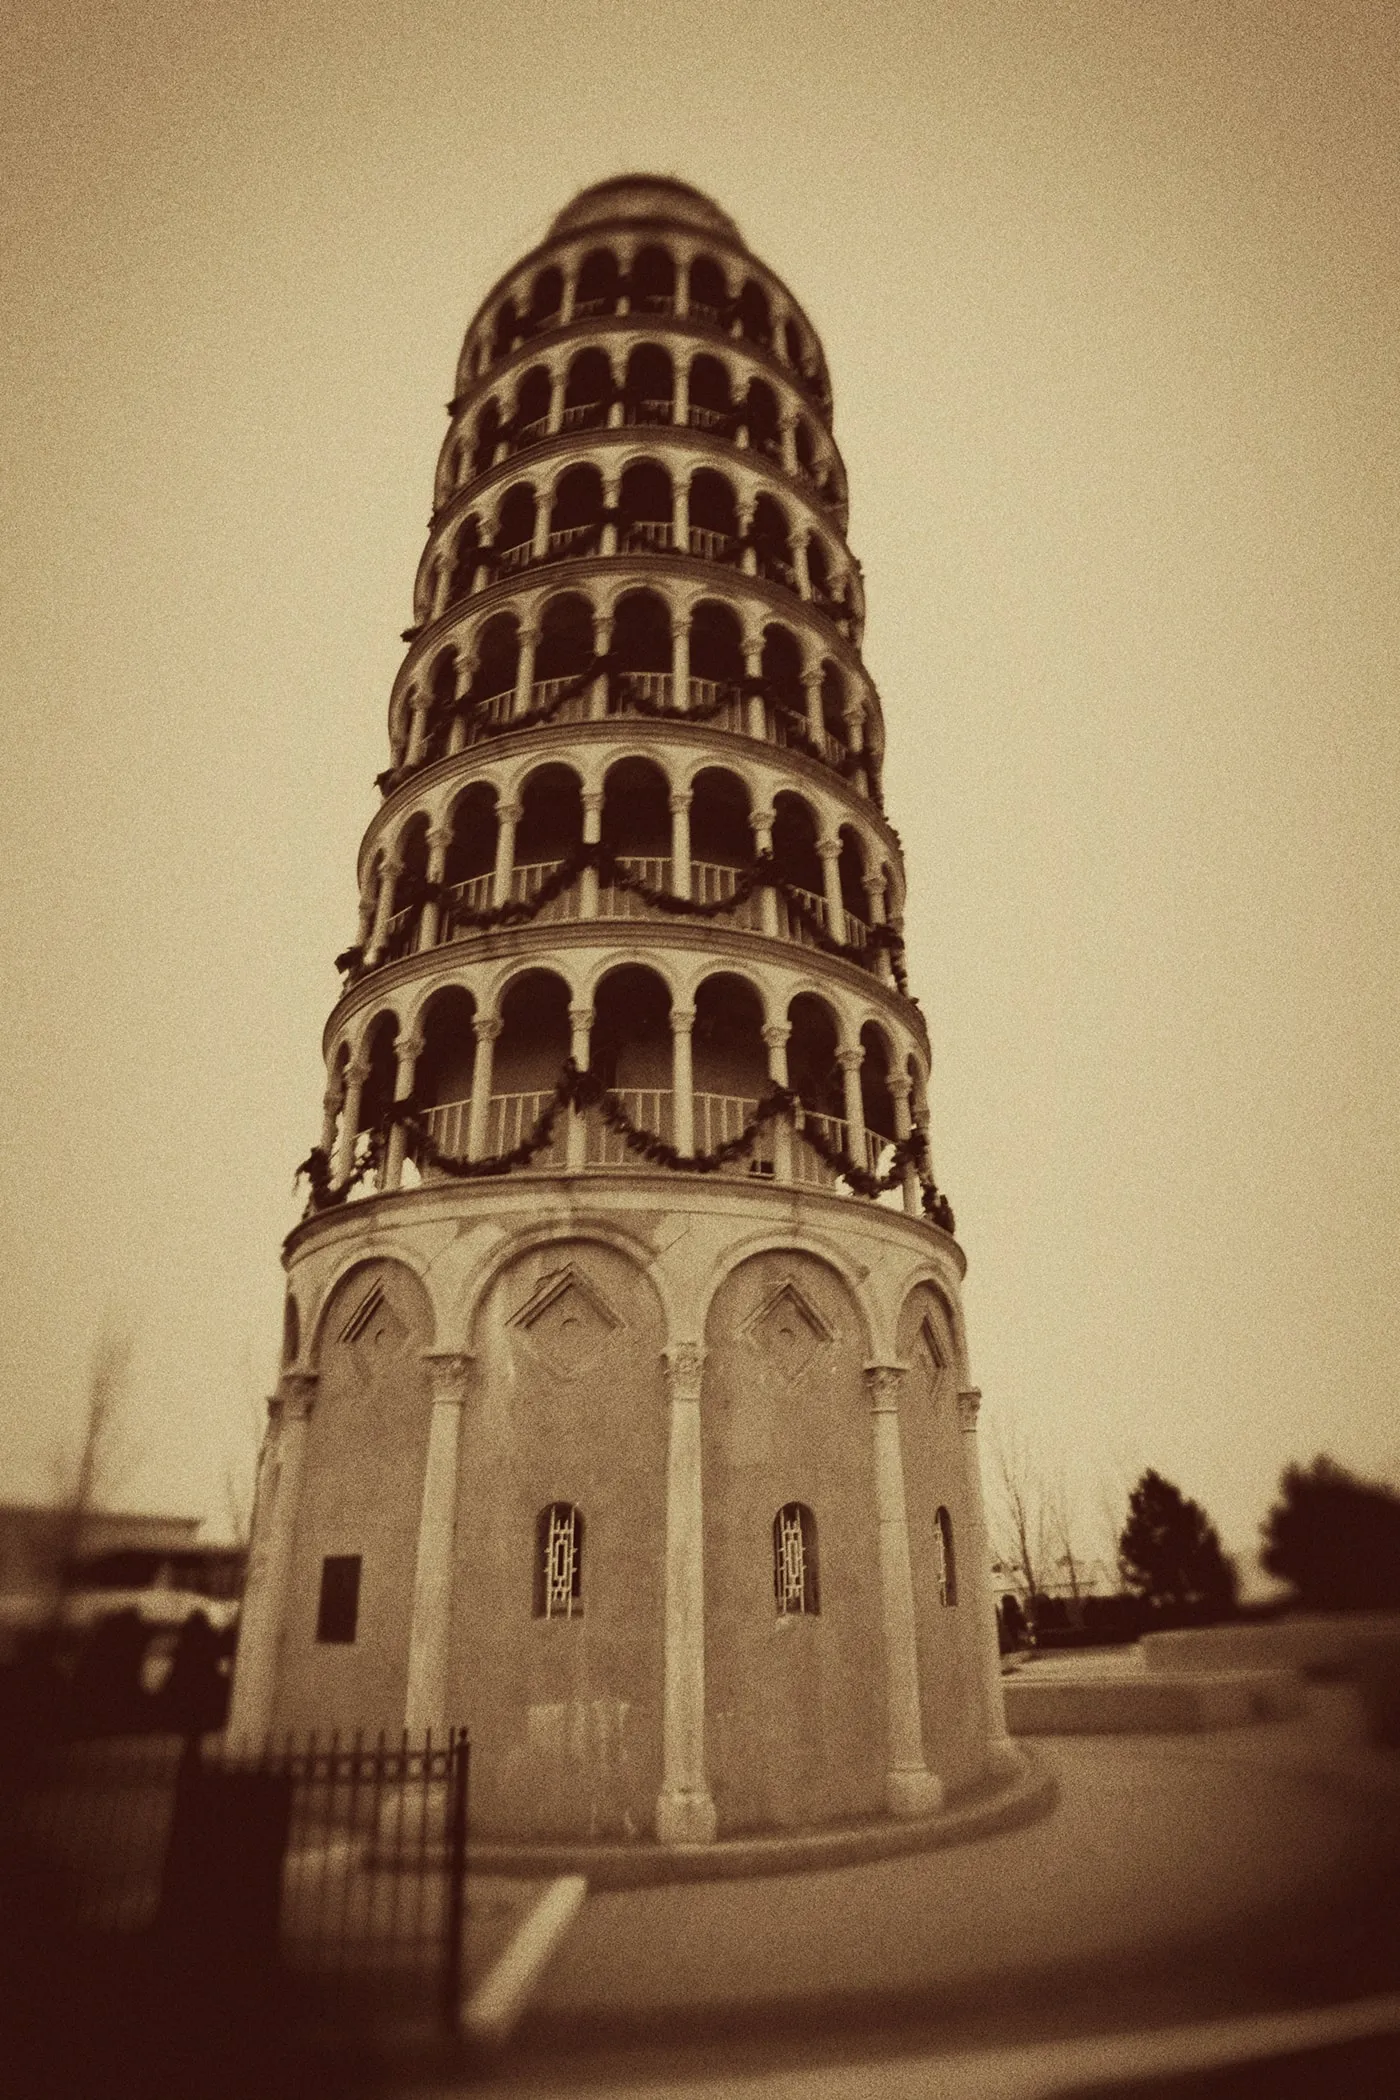 Leaning Tower of Niles - a roadside attraction in Niles, Illinois